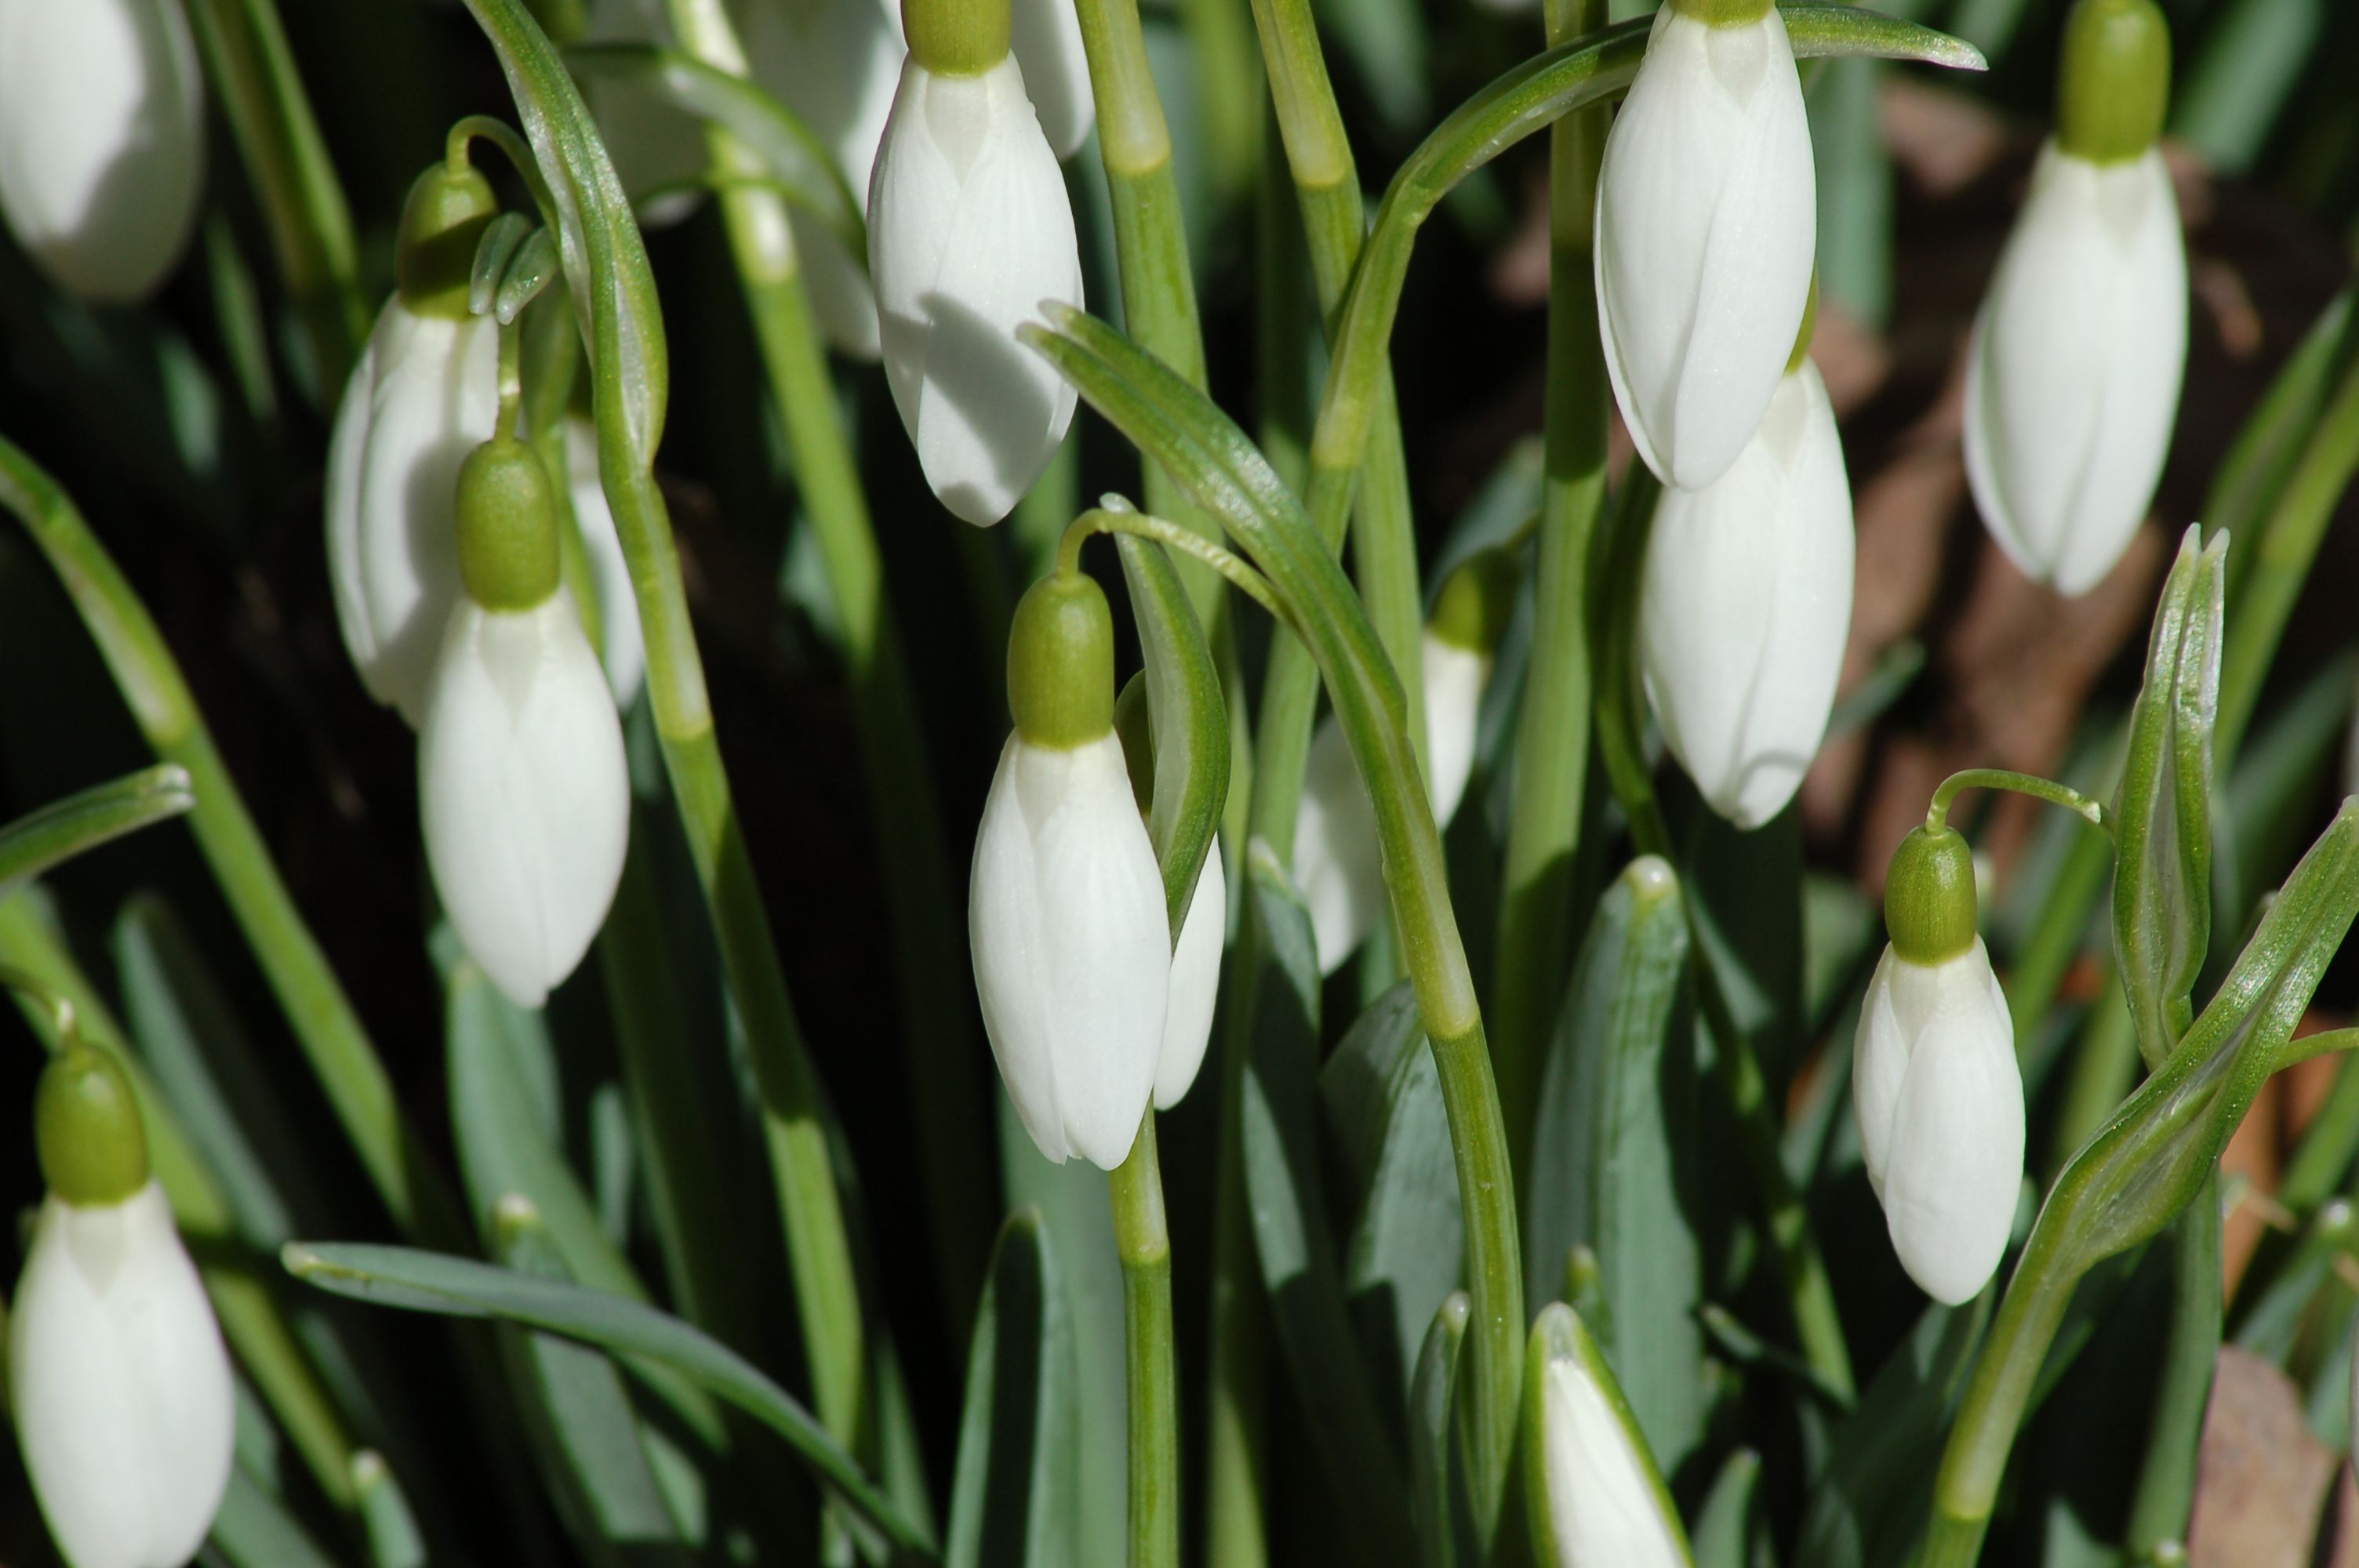 How to Grow and Care for Snowdrop Flowers